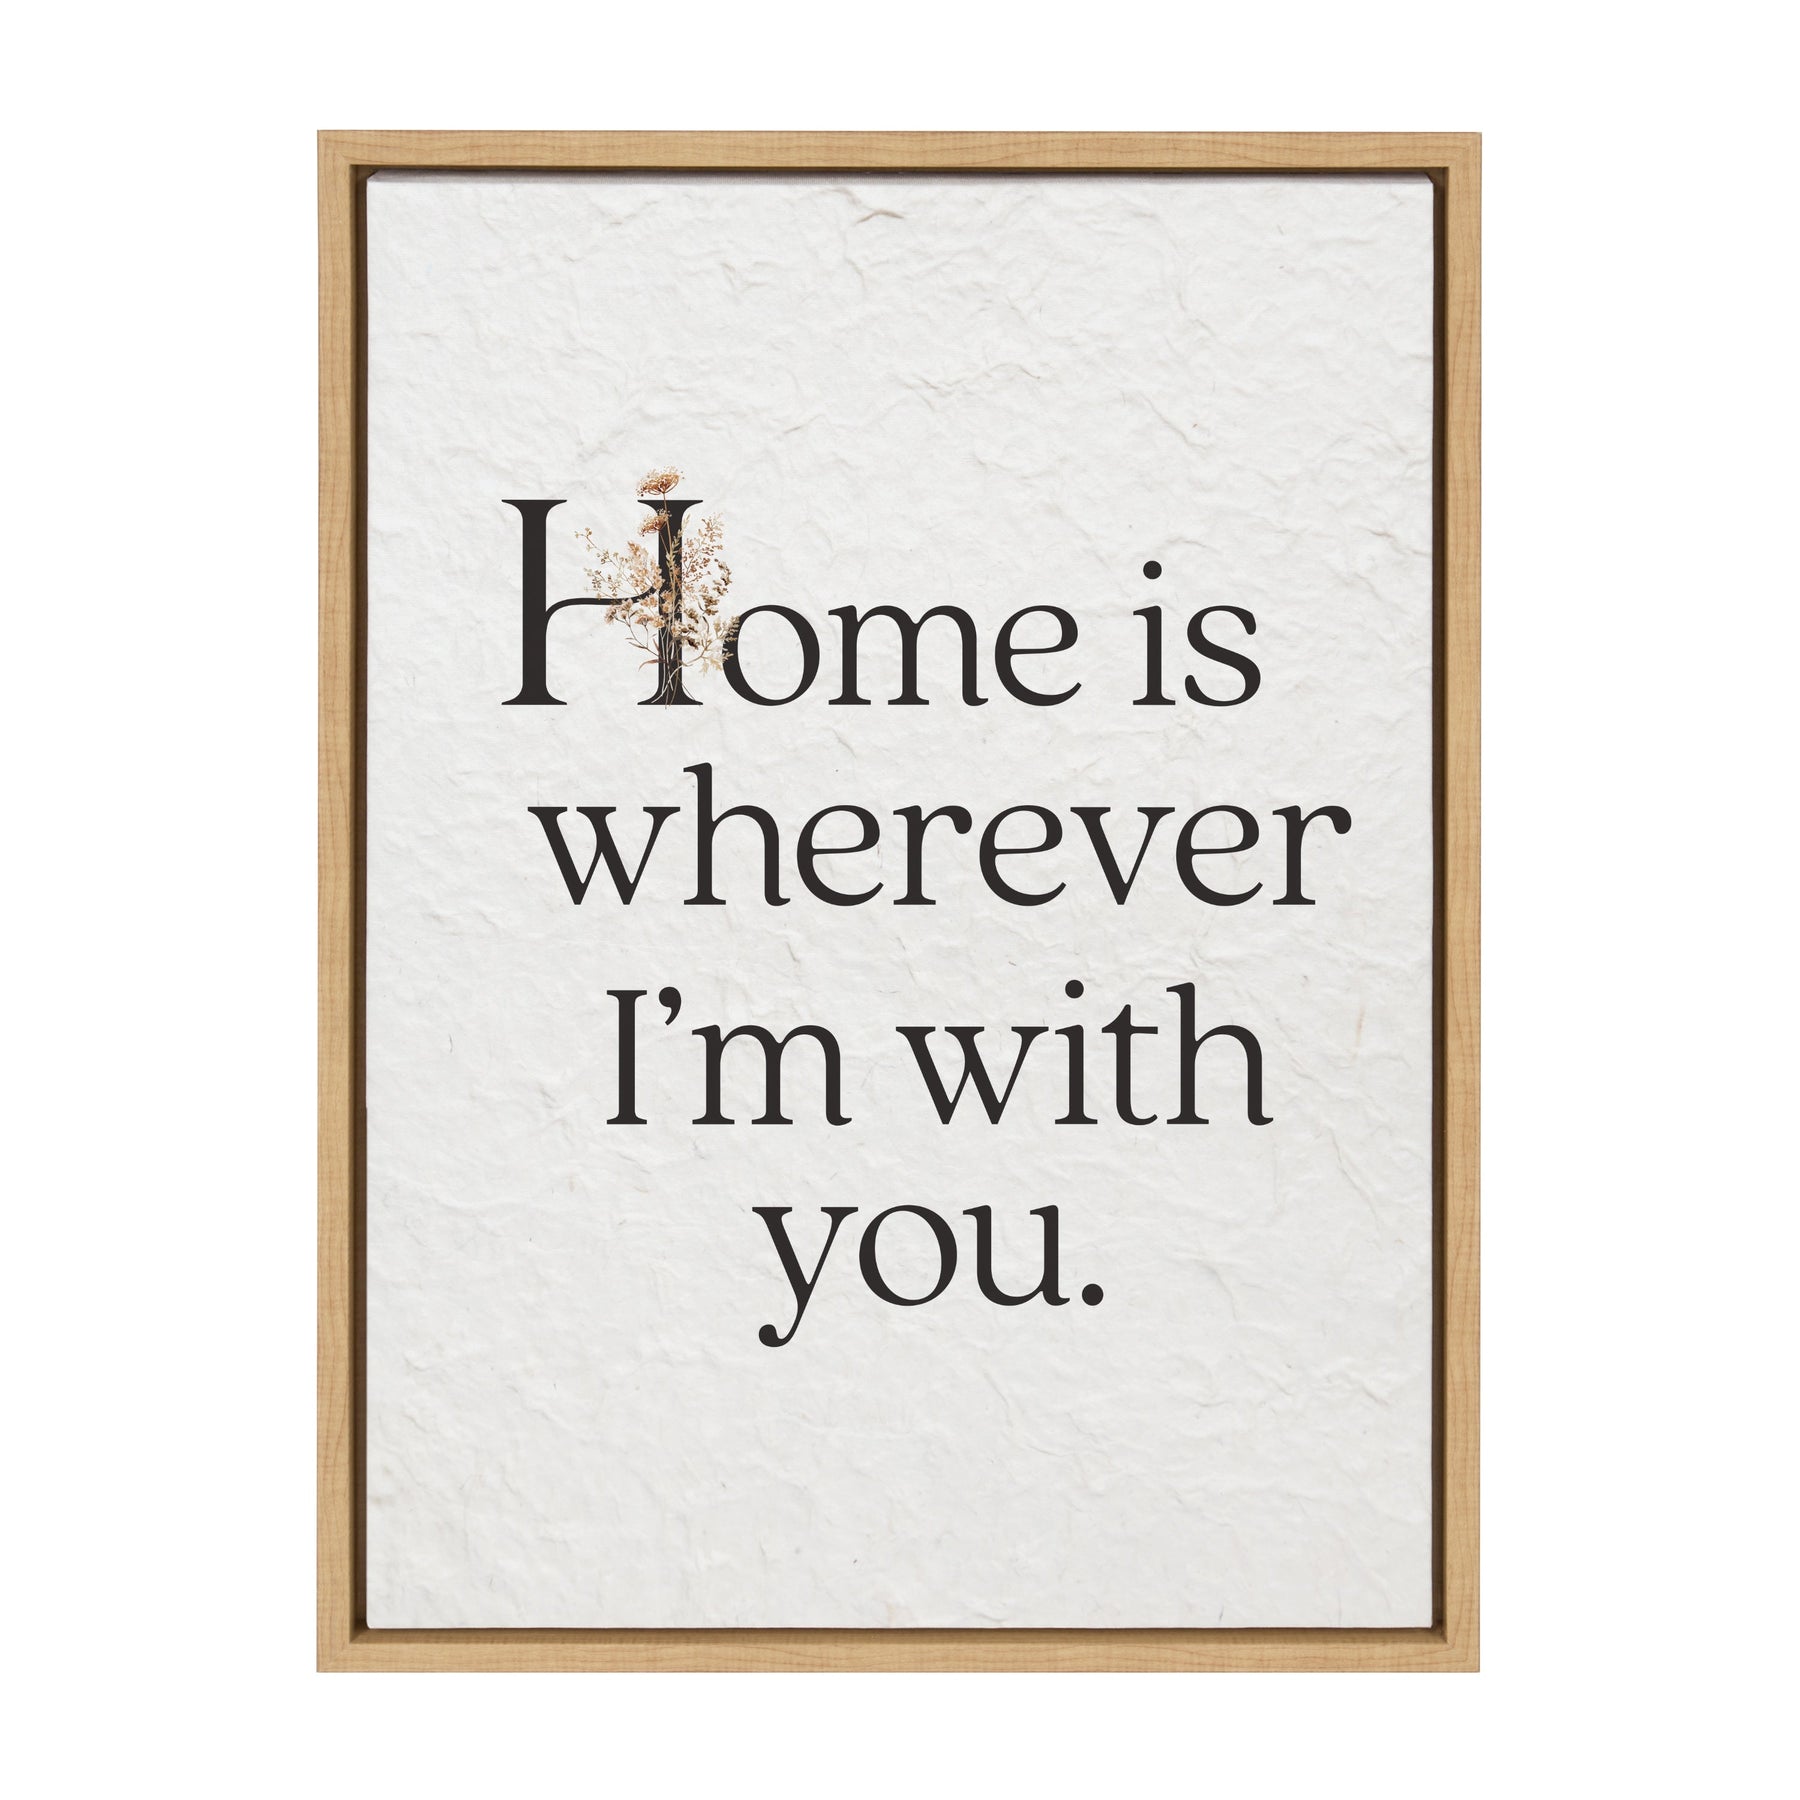 Home is wherever I'm with you / 18x24 Framed Canvas